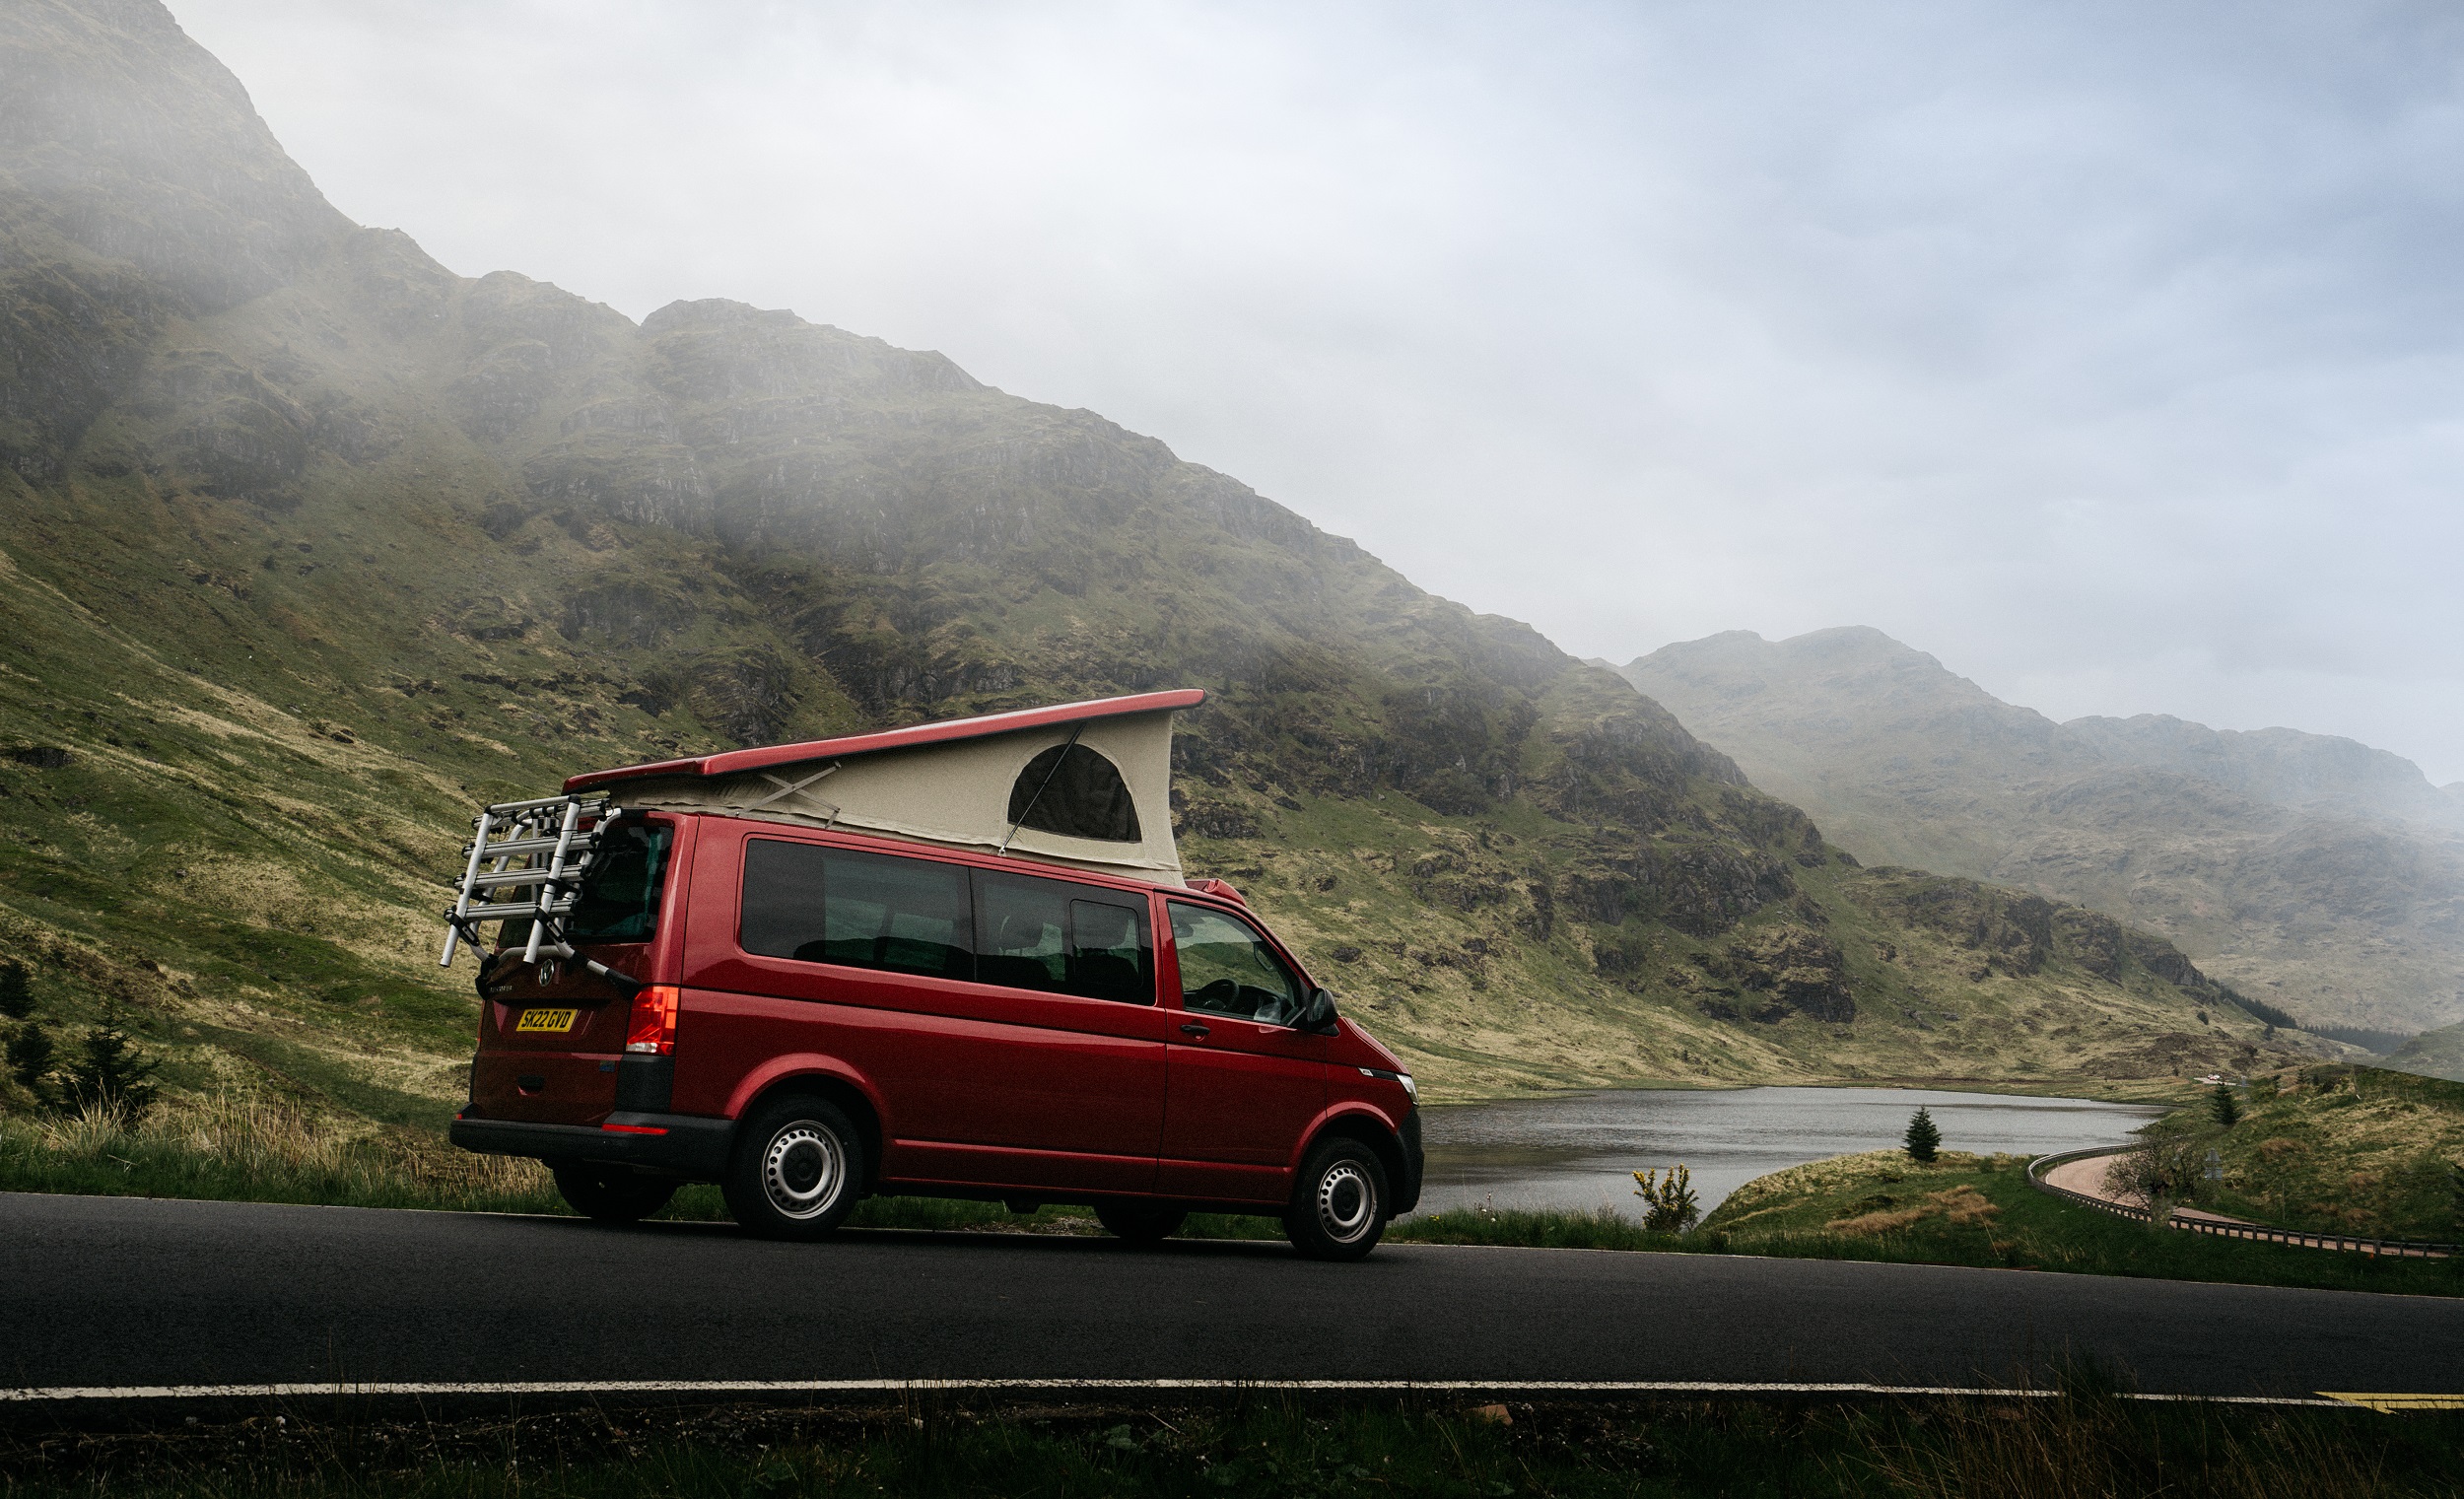 Campervan converter granted planning permission for extension